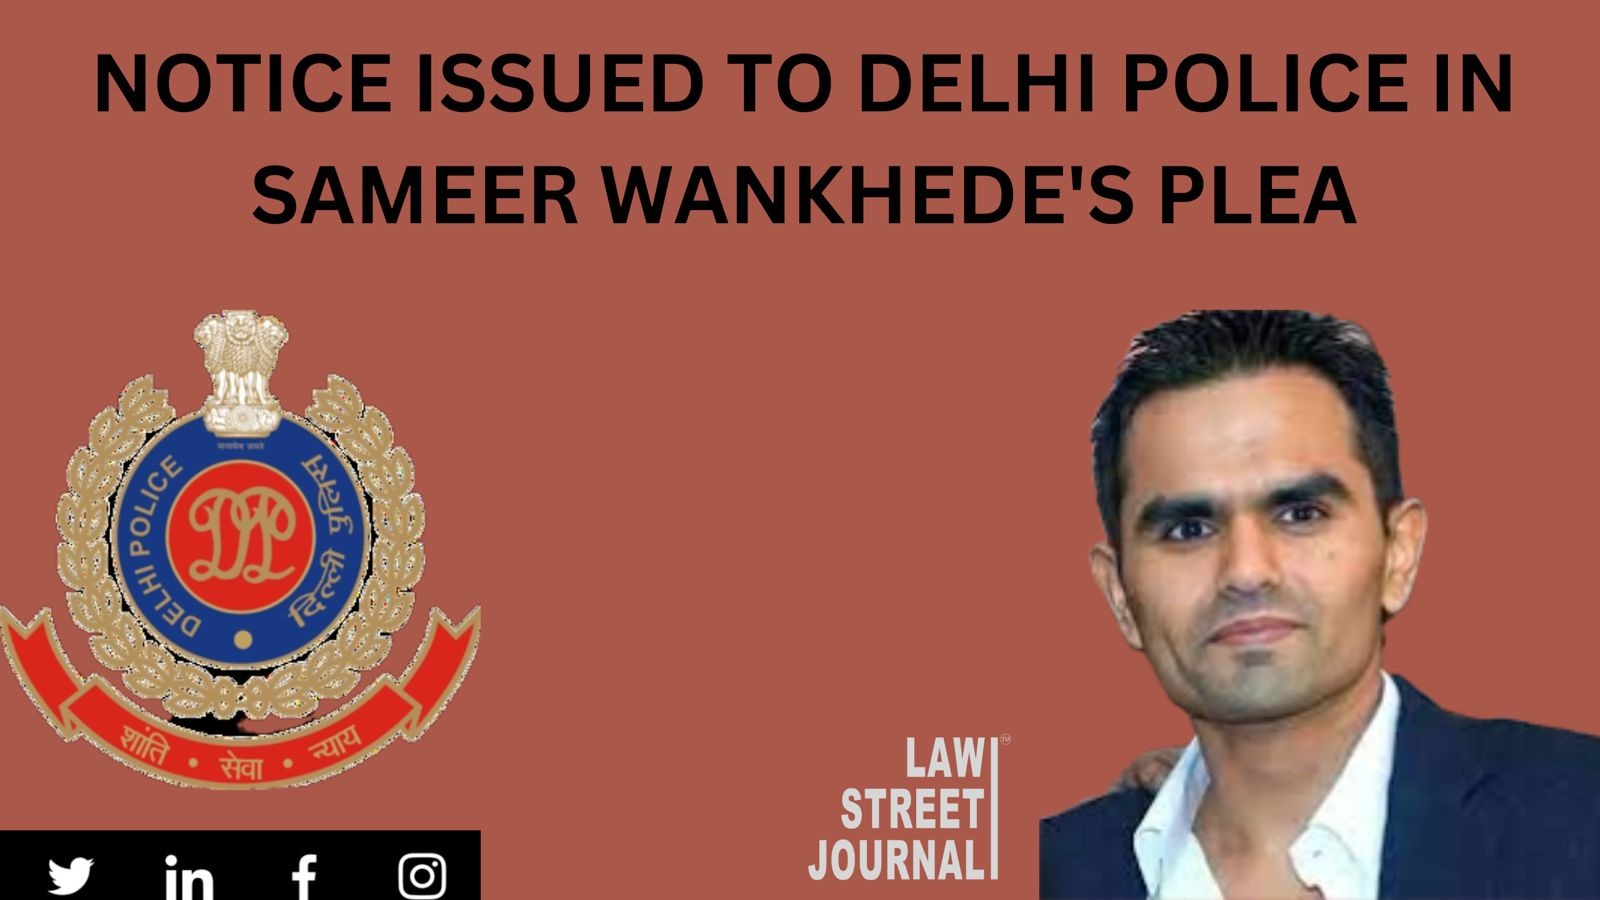 Cordelia cruise drugs case: Delhi Court issues notice to Police on Sameer Wankhede's plea against Gyaneswar Singh Read Order